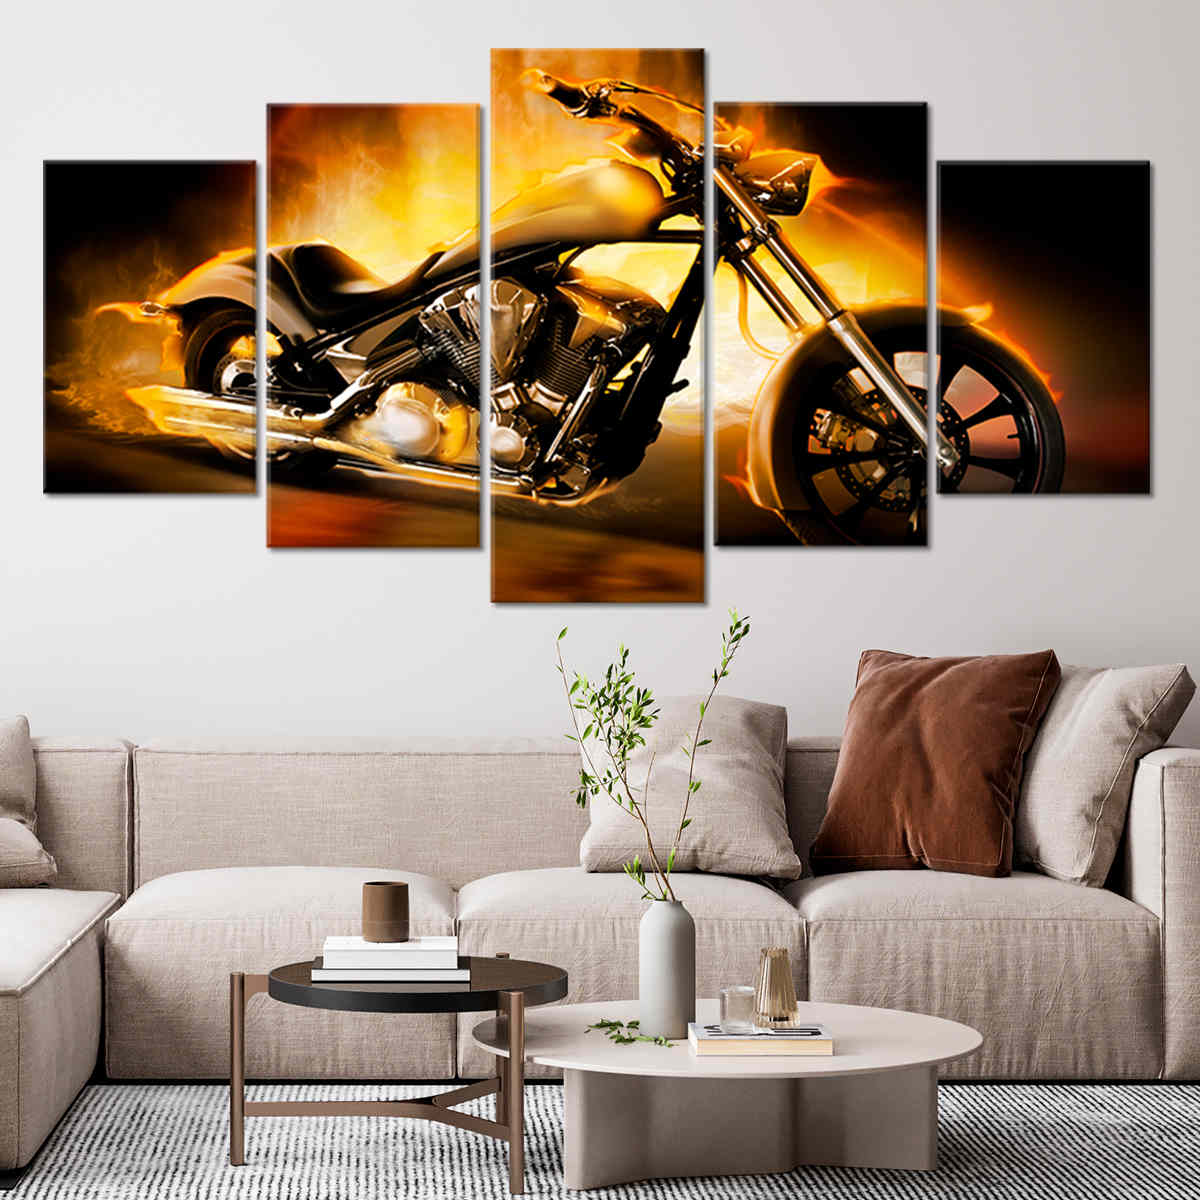 flame designs for motorcycles